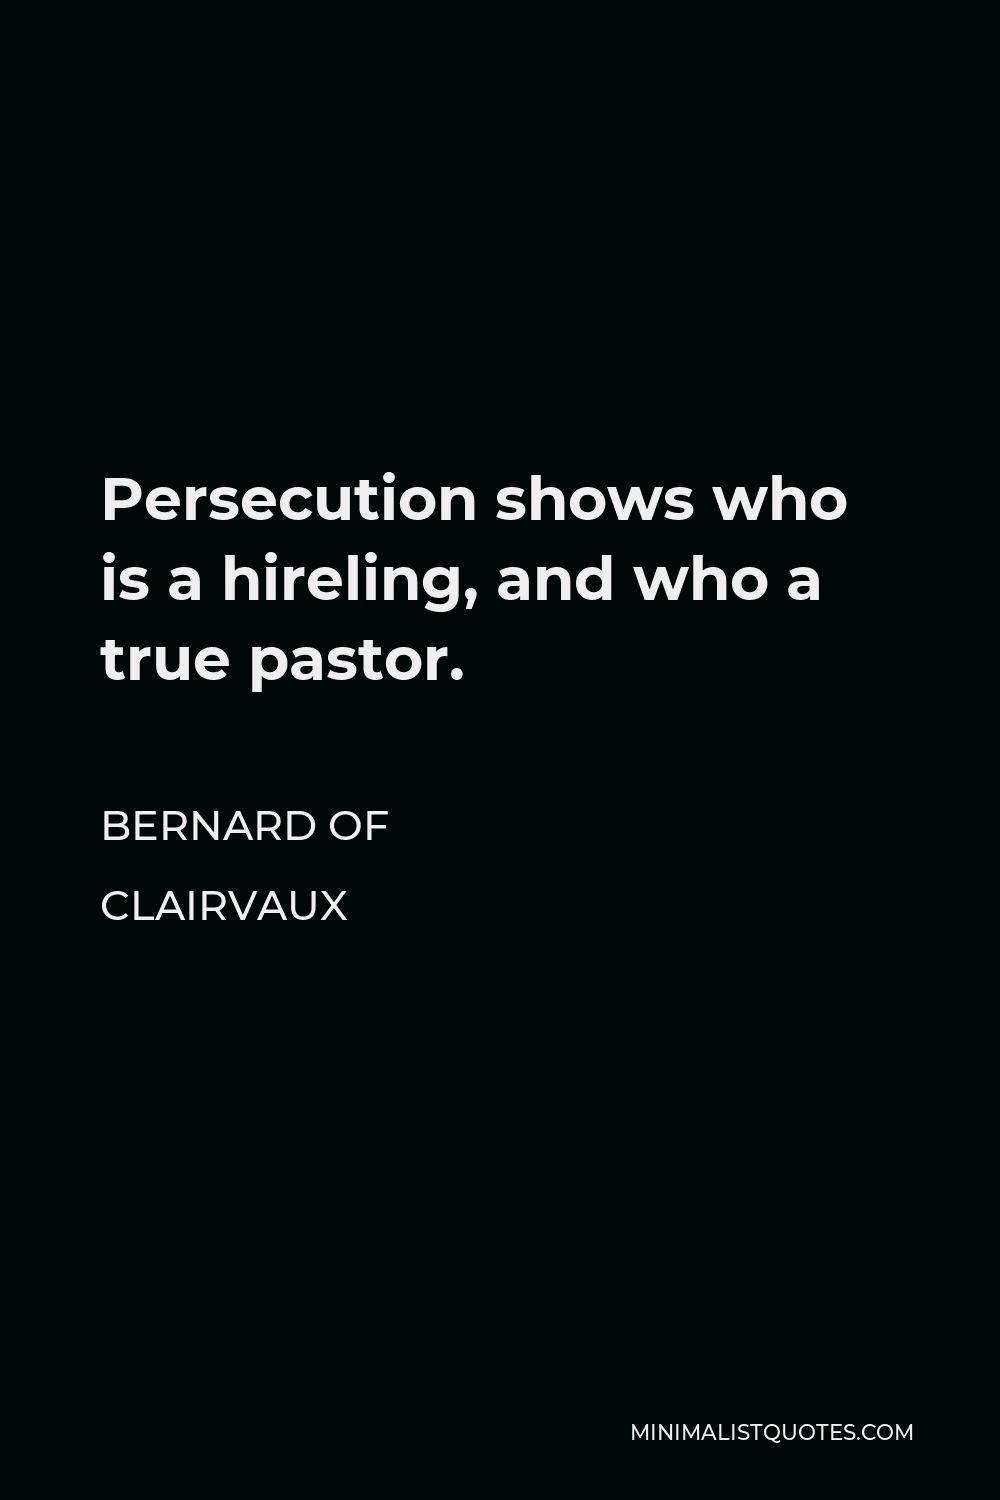 Bernard of Clairvaux Quote - Persecution shows who is a hireling, and who a true pastor.